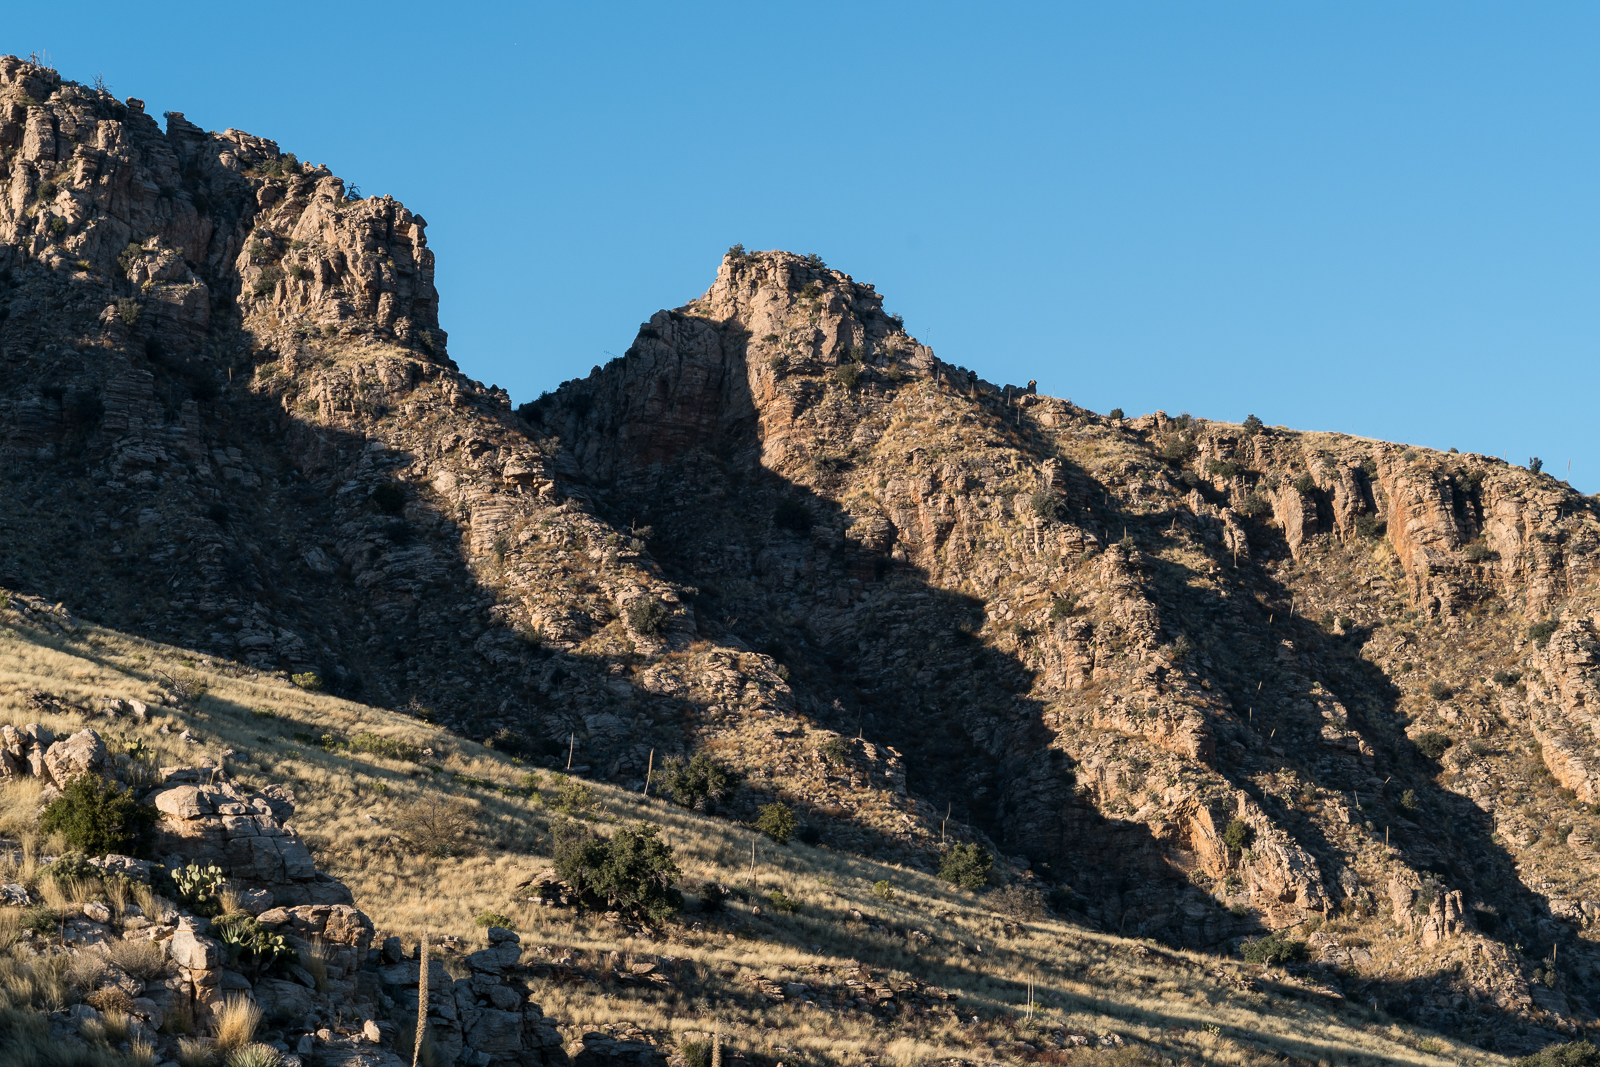 Cliffs and shadows from the Babad Do'ag Trail. January 2016.